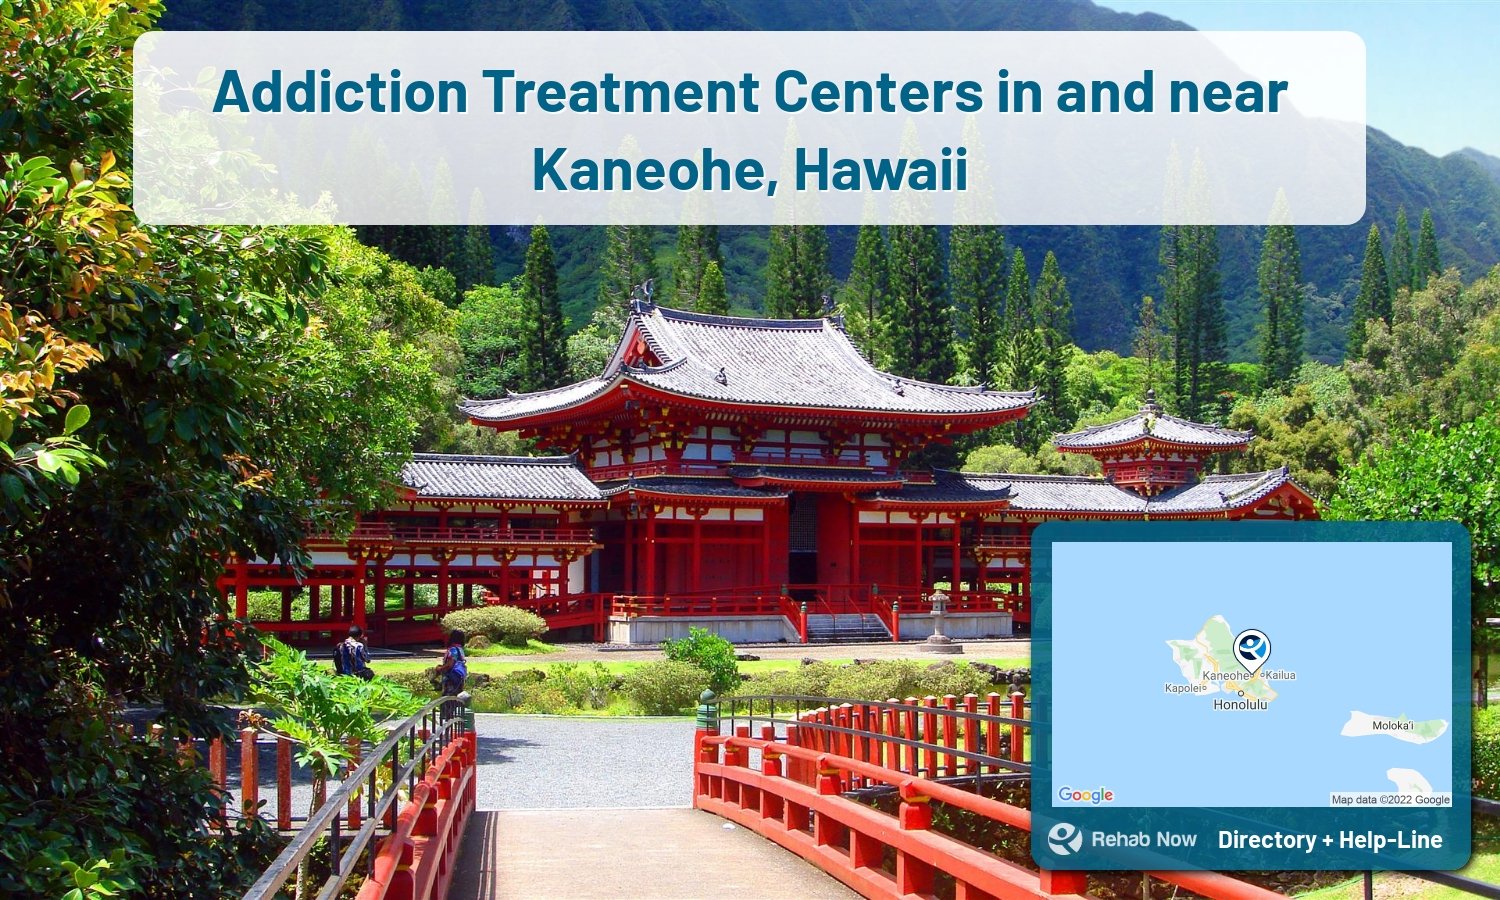 Kaneohe, HI Treatment Centers. Find drug rehab in Kaneohe, Hawaii, or detox and treatment programs. Get the right help now!